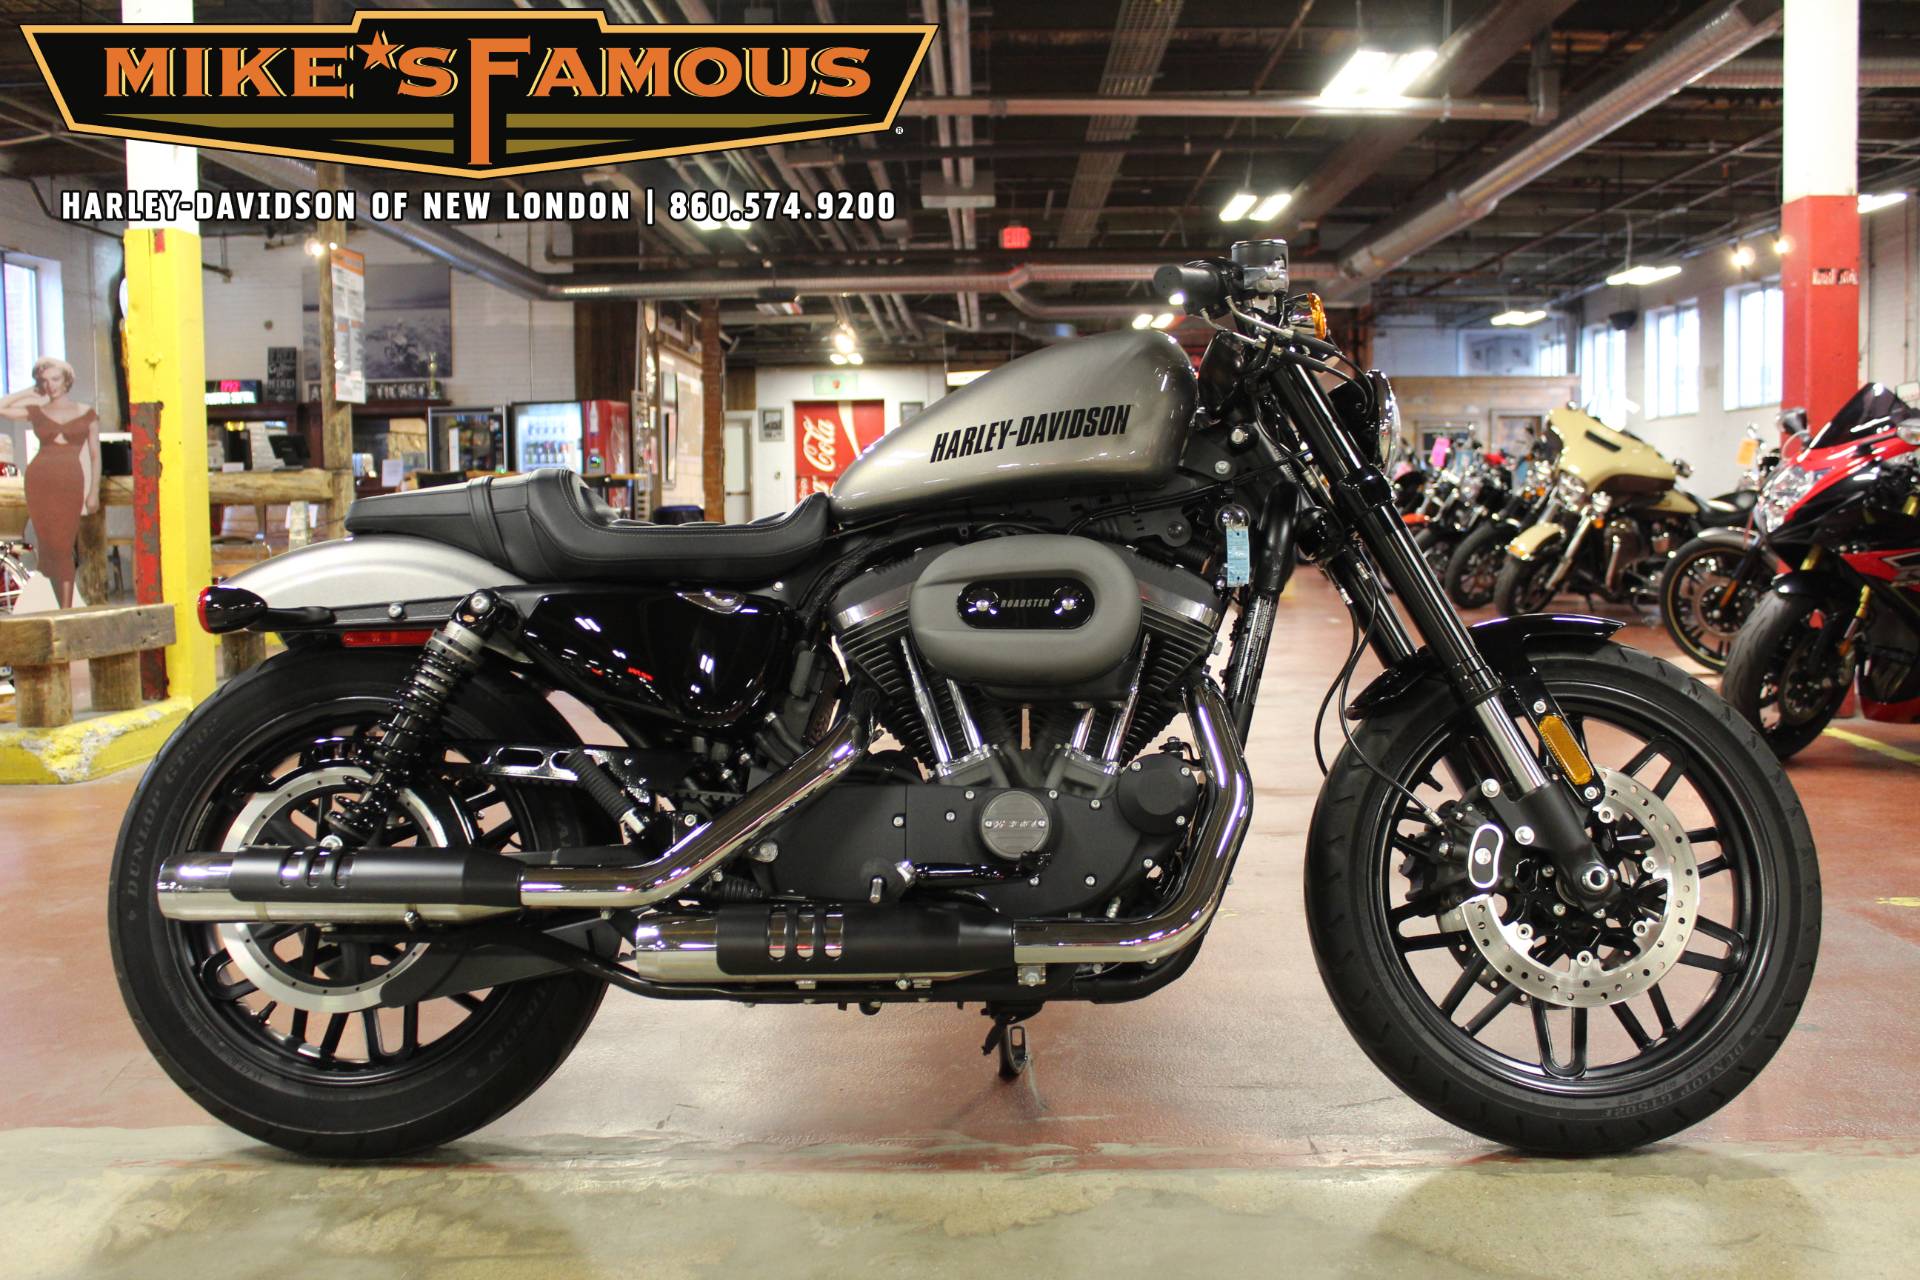 Used 2016 Harley Davidson Roadster Billet Silver Vivid Black Motorcycles In New London Ct T46490a